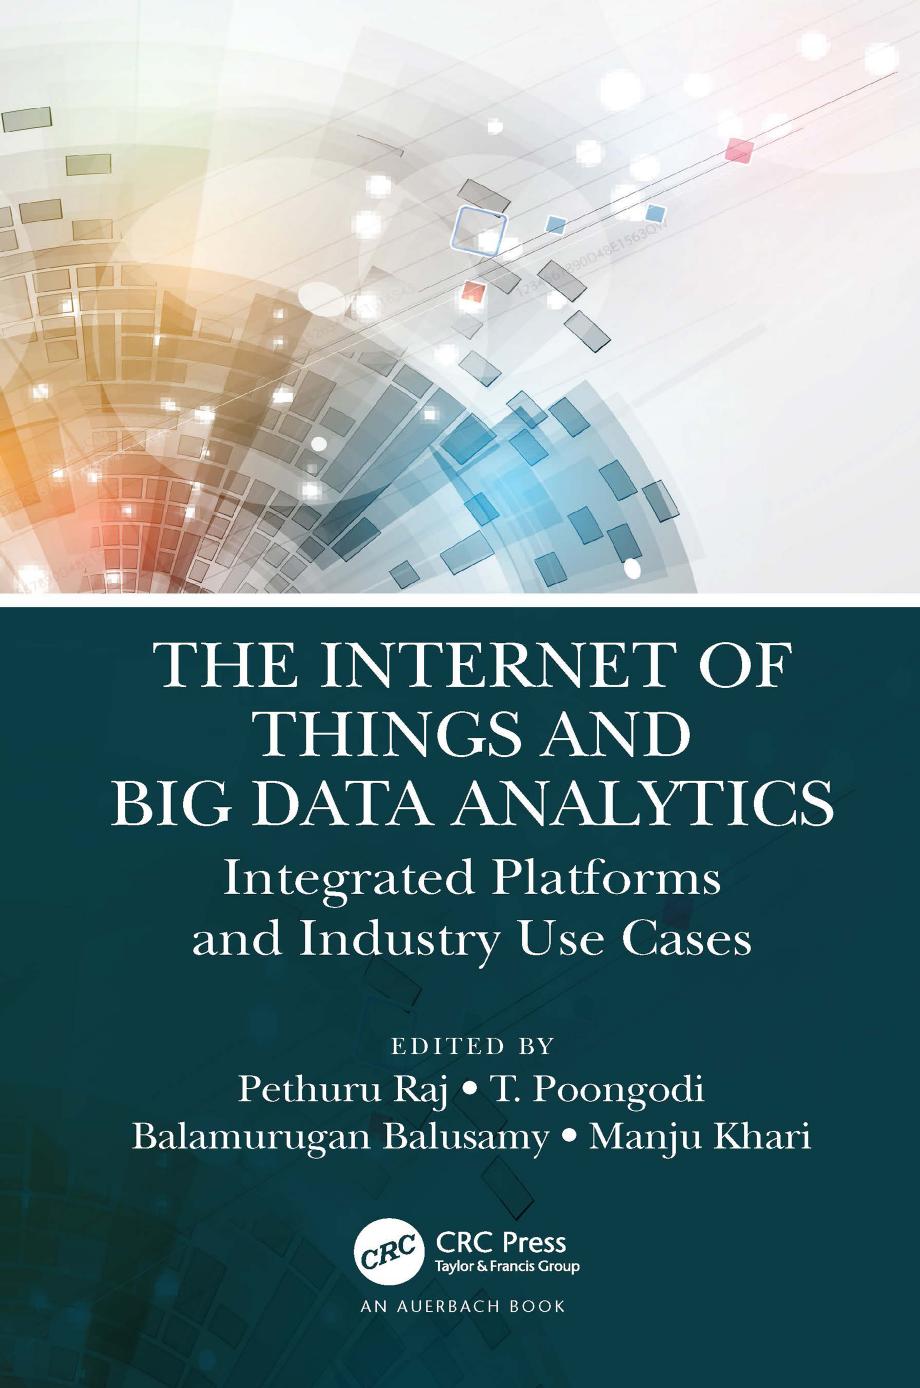 The Internet of Things and Big Data Analytics; Integrated Platforms and Industry Use Cases